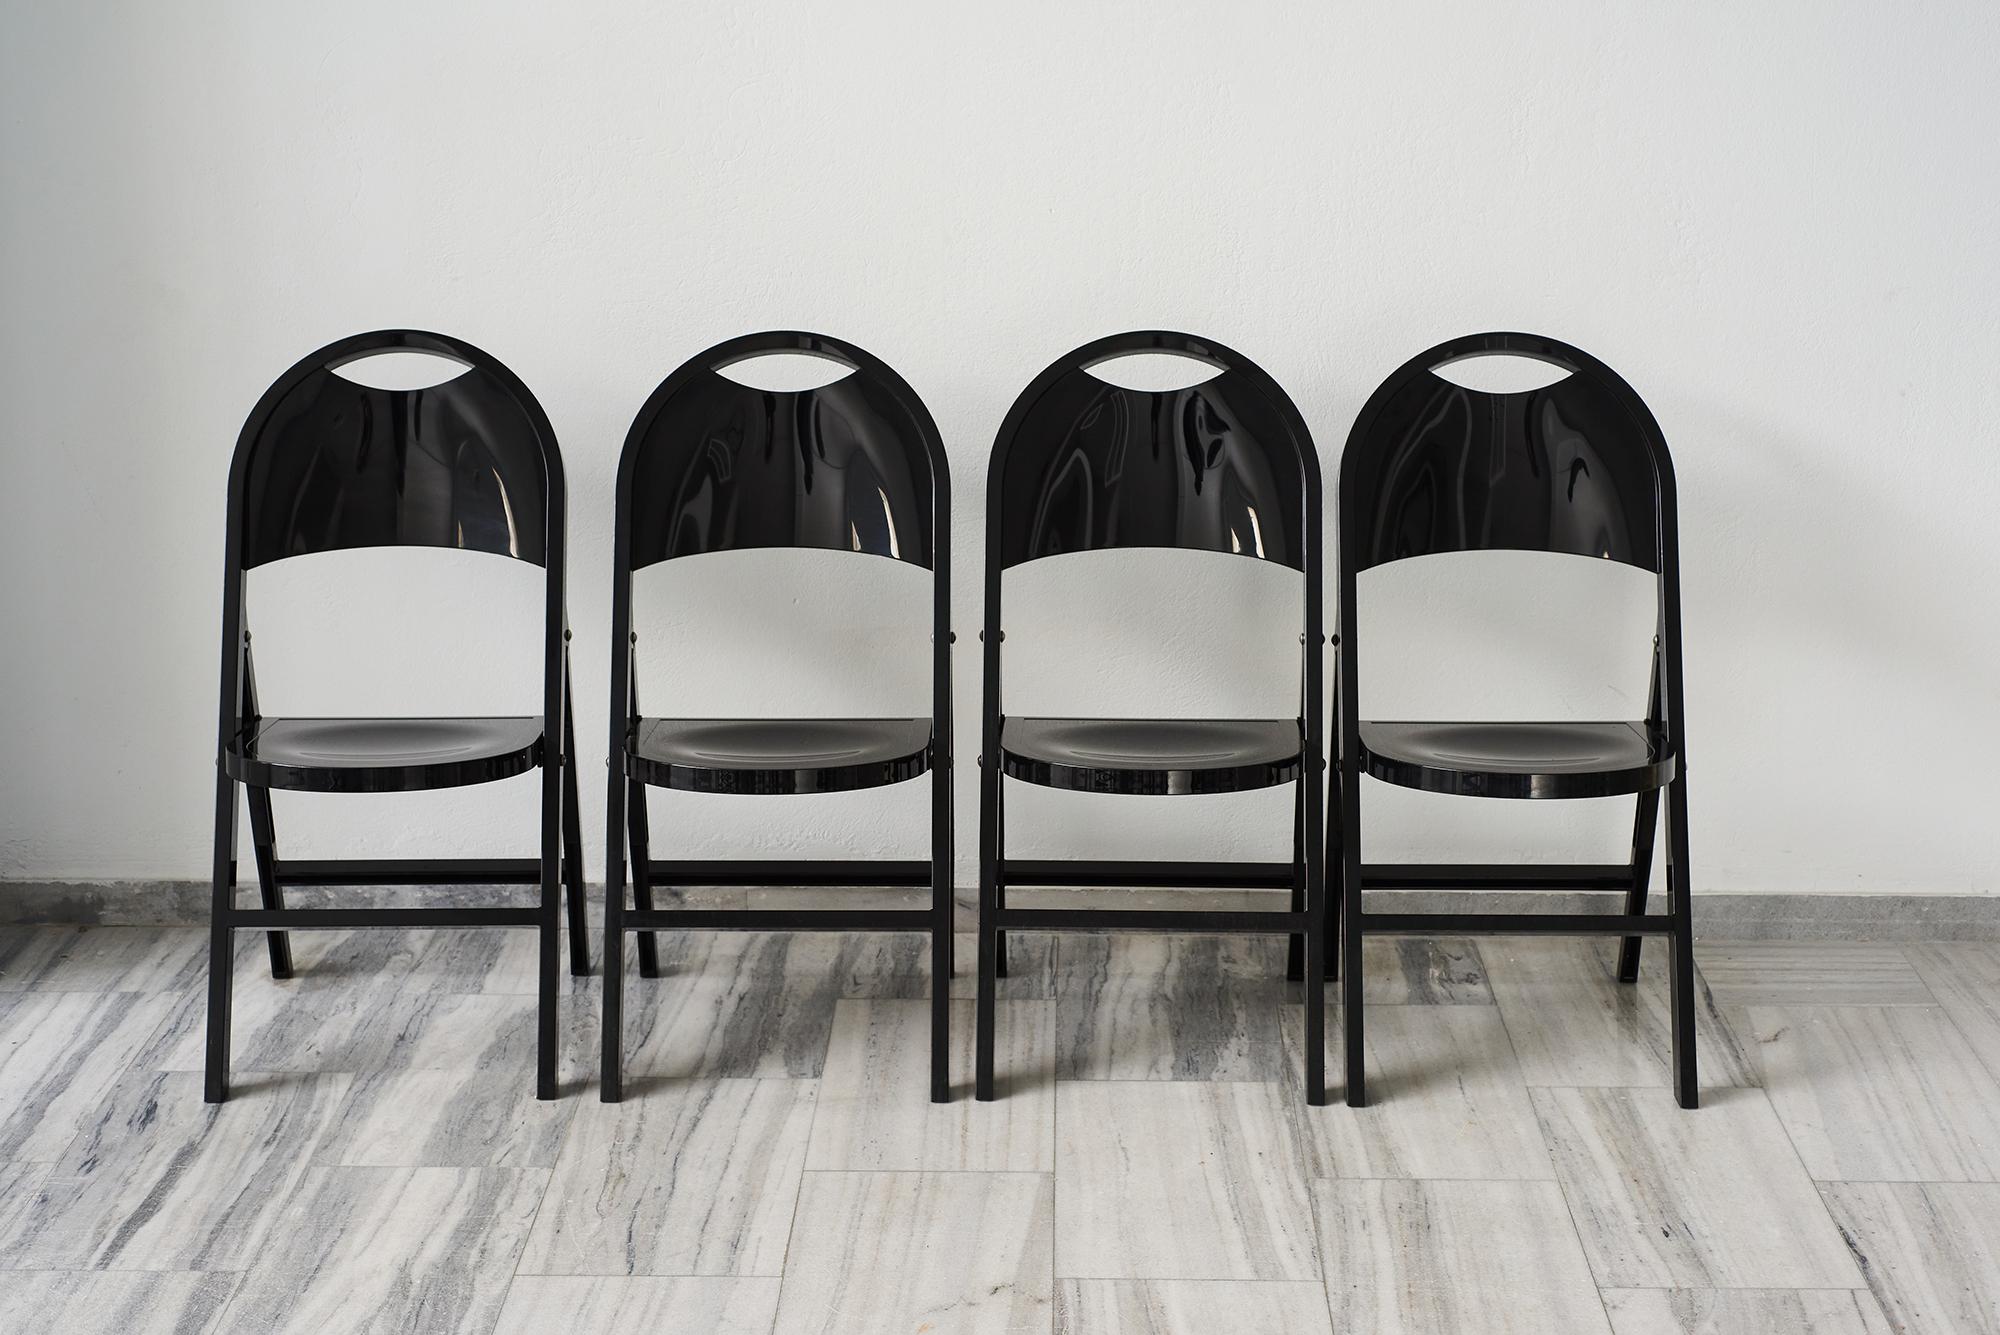 Black glossy polycarbonate folding chairs, model ‘Tric’ by Achille and Piergiacomo Castiglioni for BBB Emmebonacina.
Excellent condition, unused, in their original boxes.